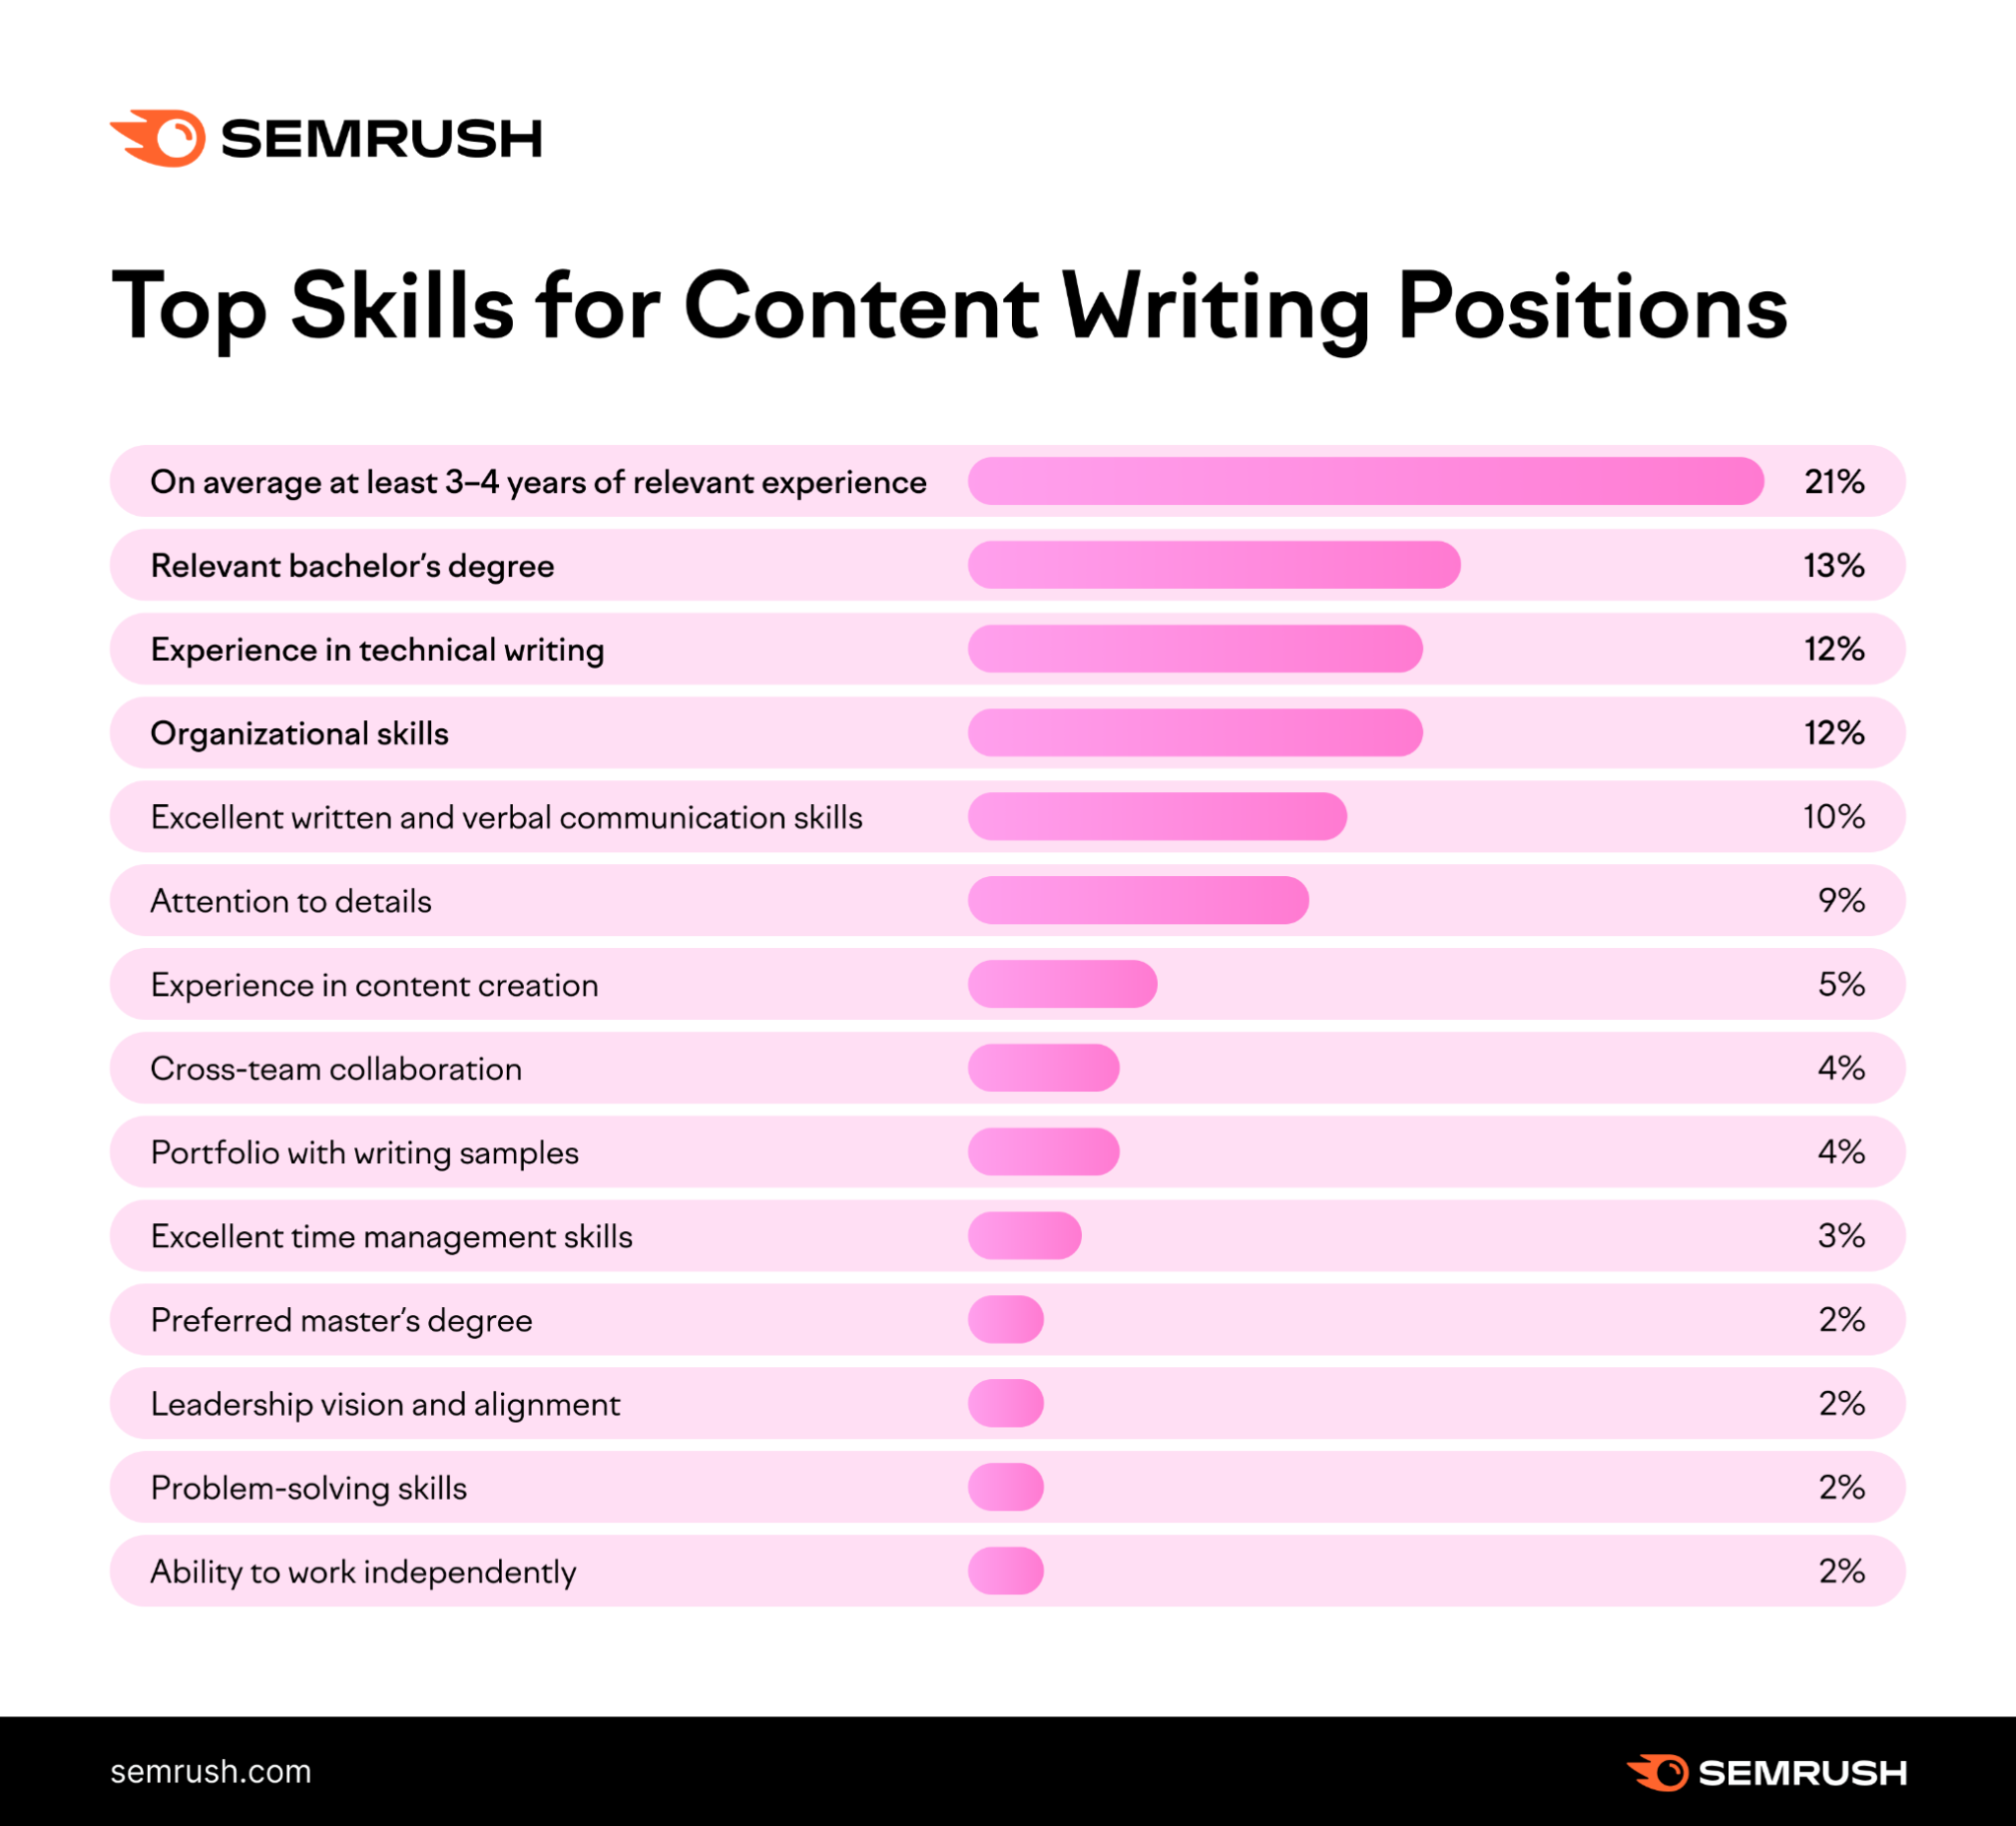 Top content writing skills in 2023